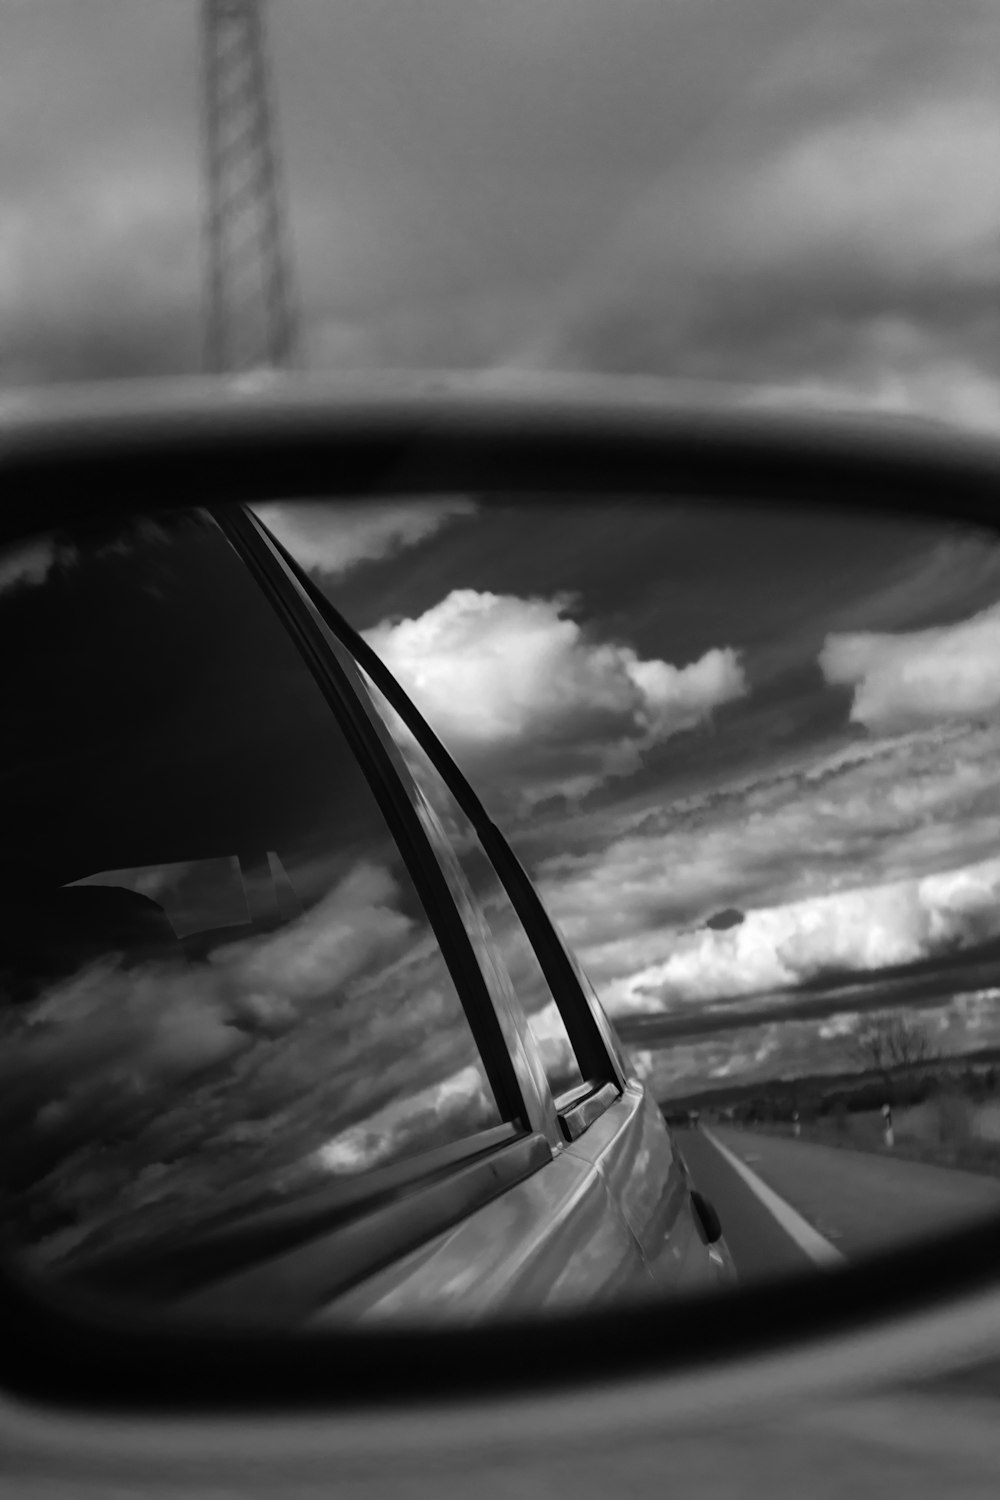 a rear view mirror on a car with clouds in the background